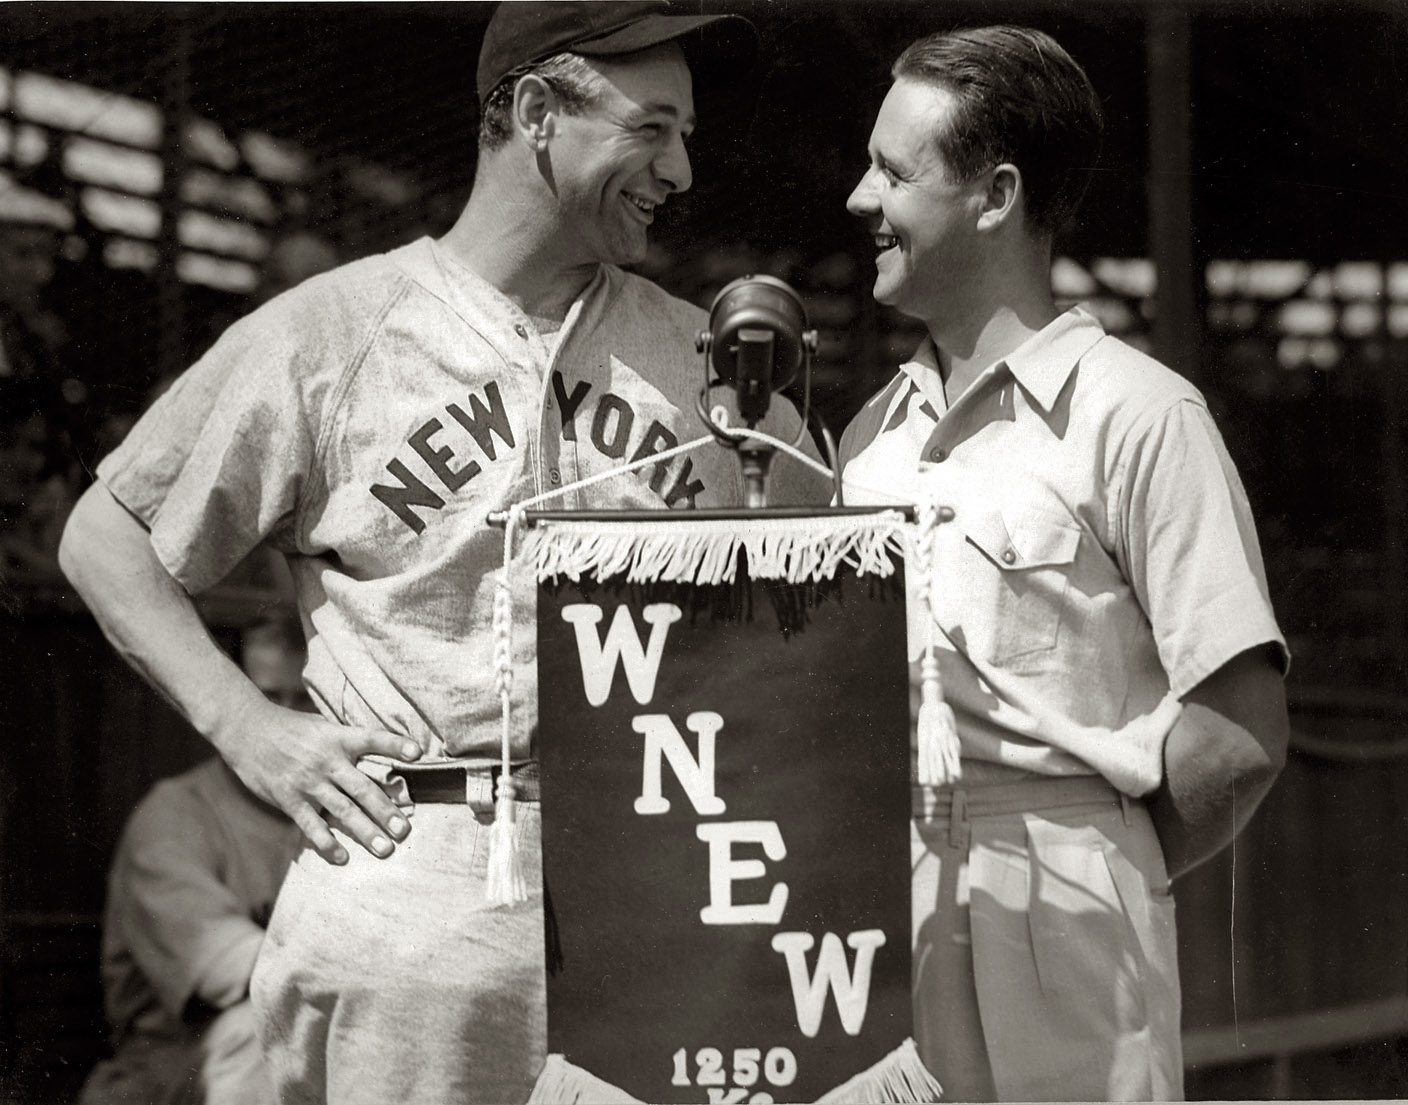 A publicity photo of the Iron Horse, Lou Gehrig, with my grandfather Earl Harper, a broadcaster with WNEW Newark in the 1930s. My grandfather died when I was way too young to know him, but I treasure this family memento and only wished I could have heard his many stories about those days in baseball history! View full size.